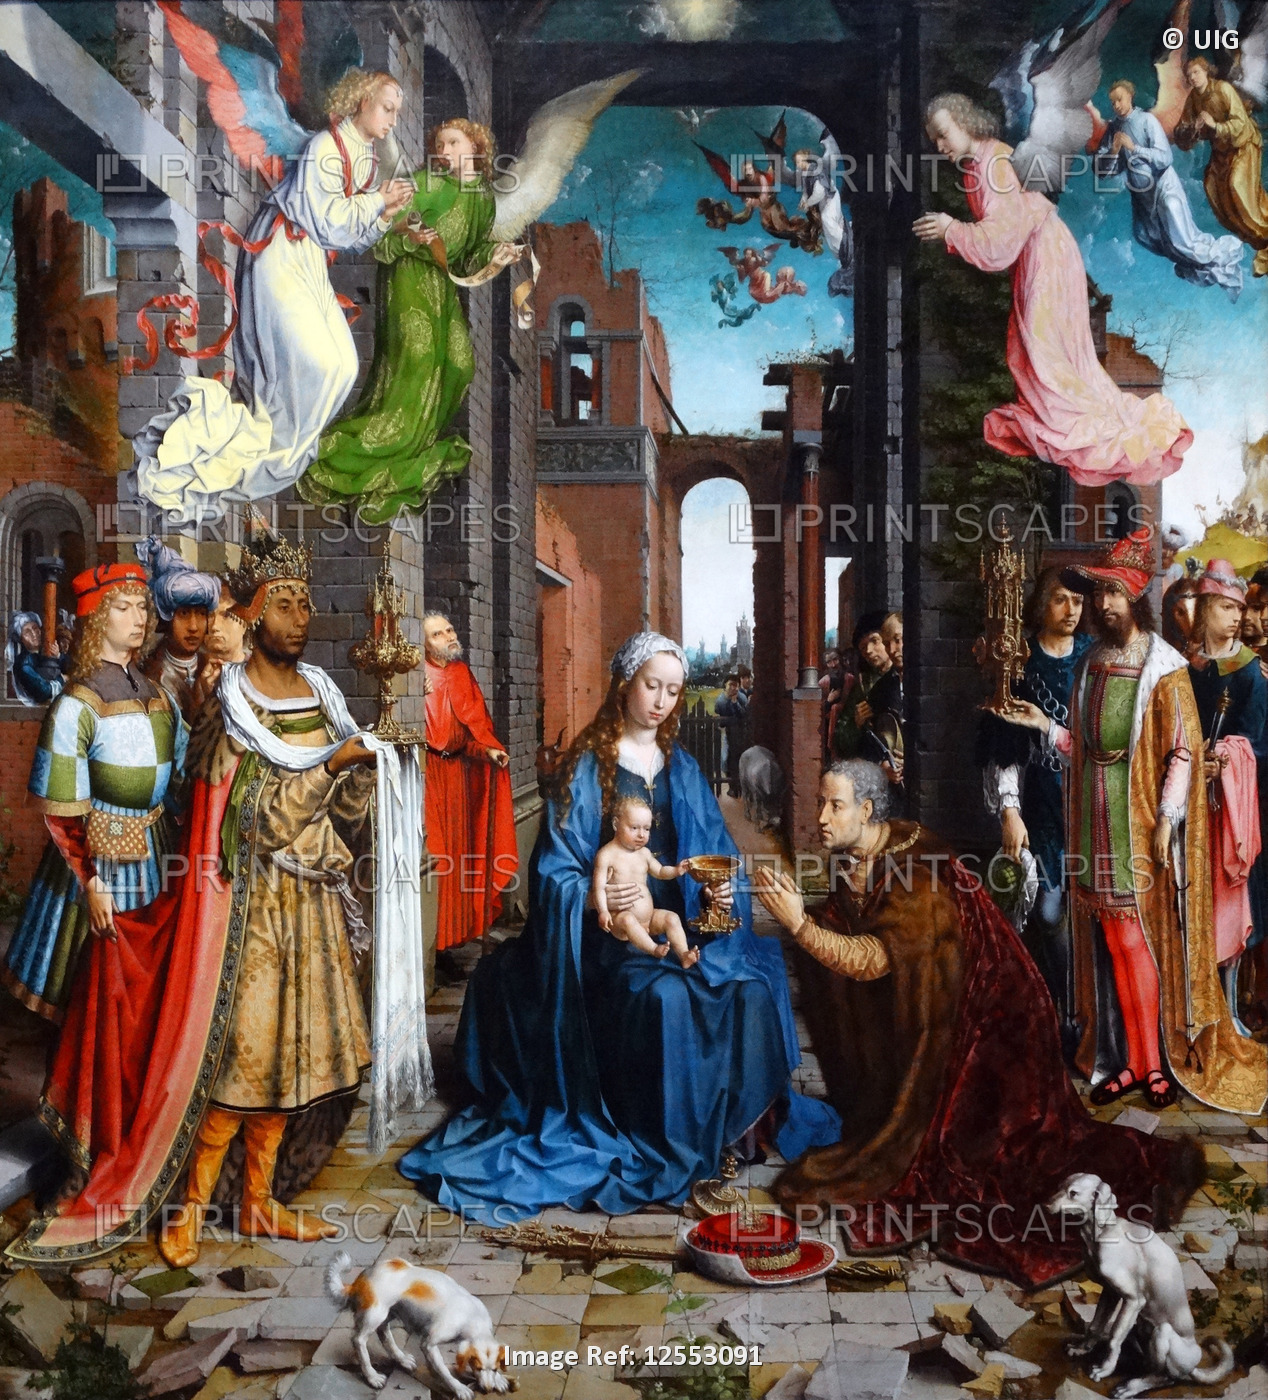 Painting titled 'The Adoration of the Kings' by Jan Gossaert, 16th century